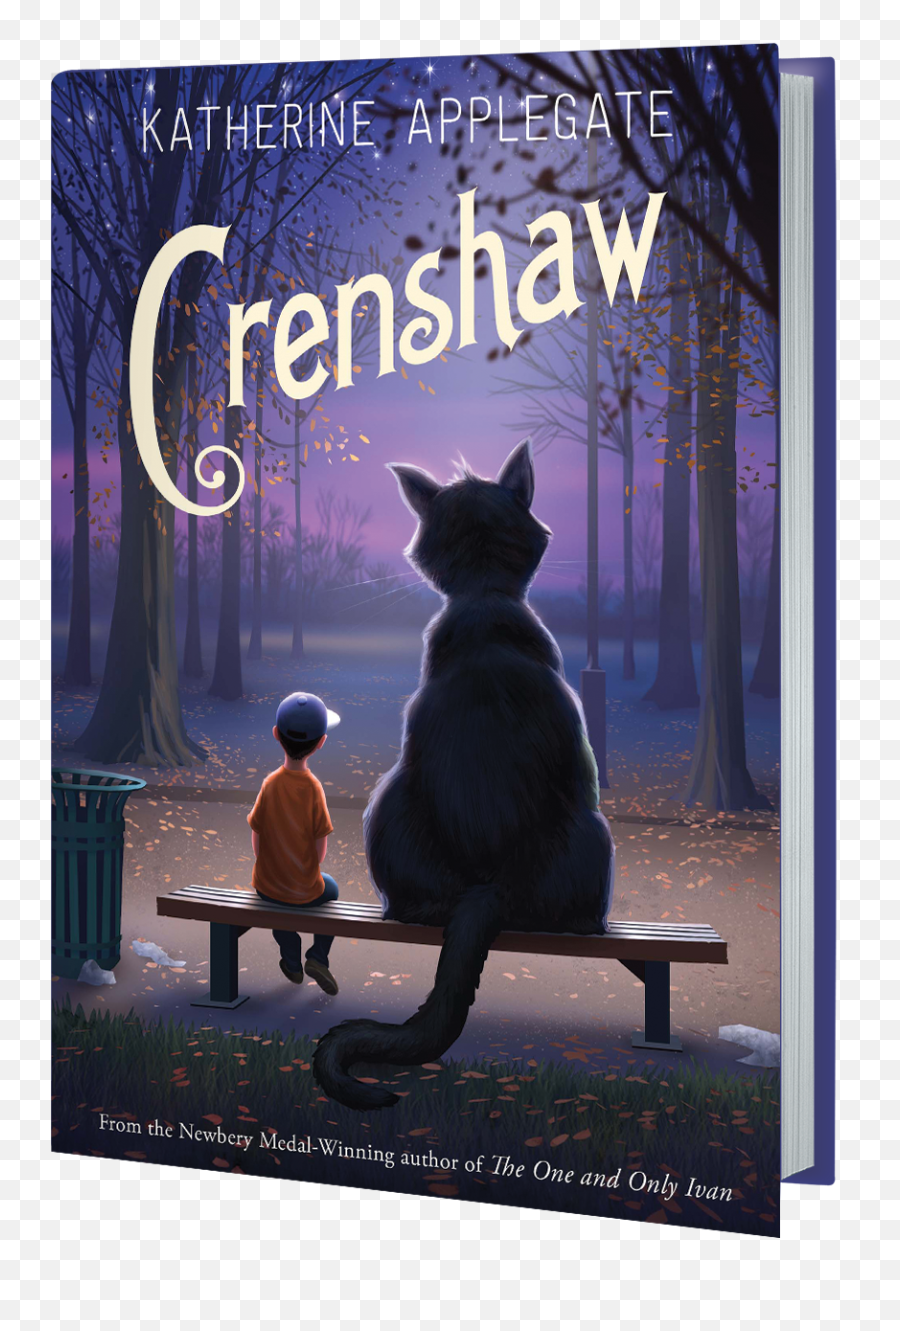 Crenshaw By Katherine Applegate Home - Picture Frame Emoji,Children's Book About Emotions From The 90s